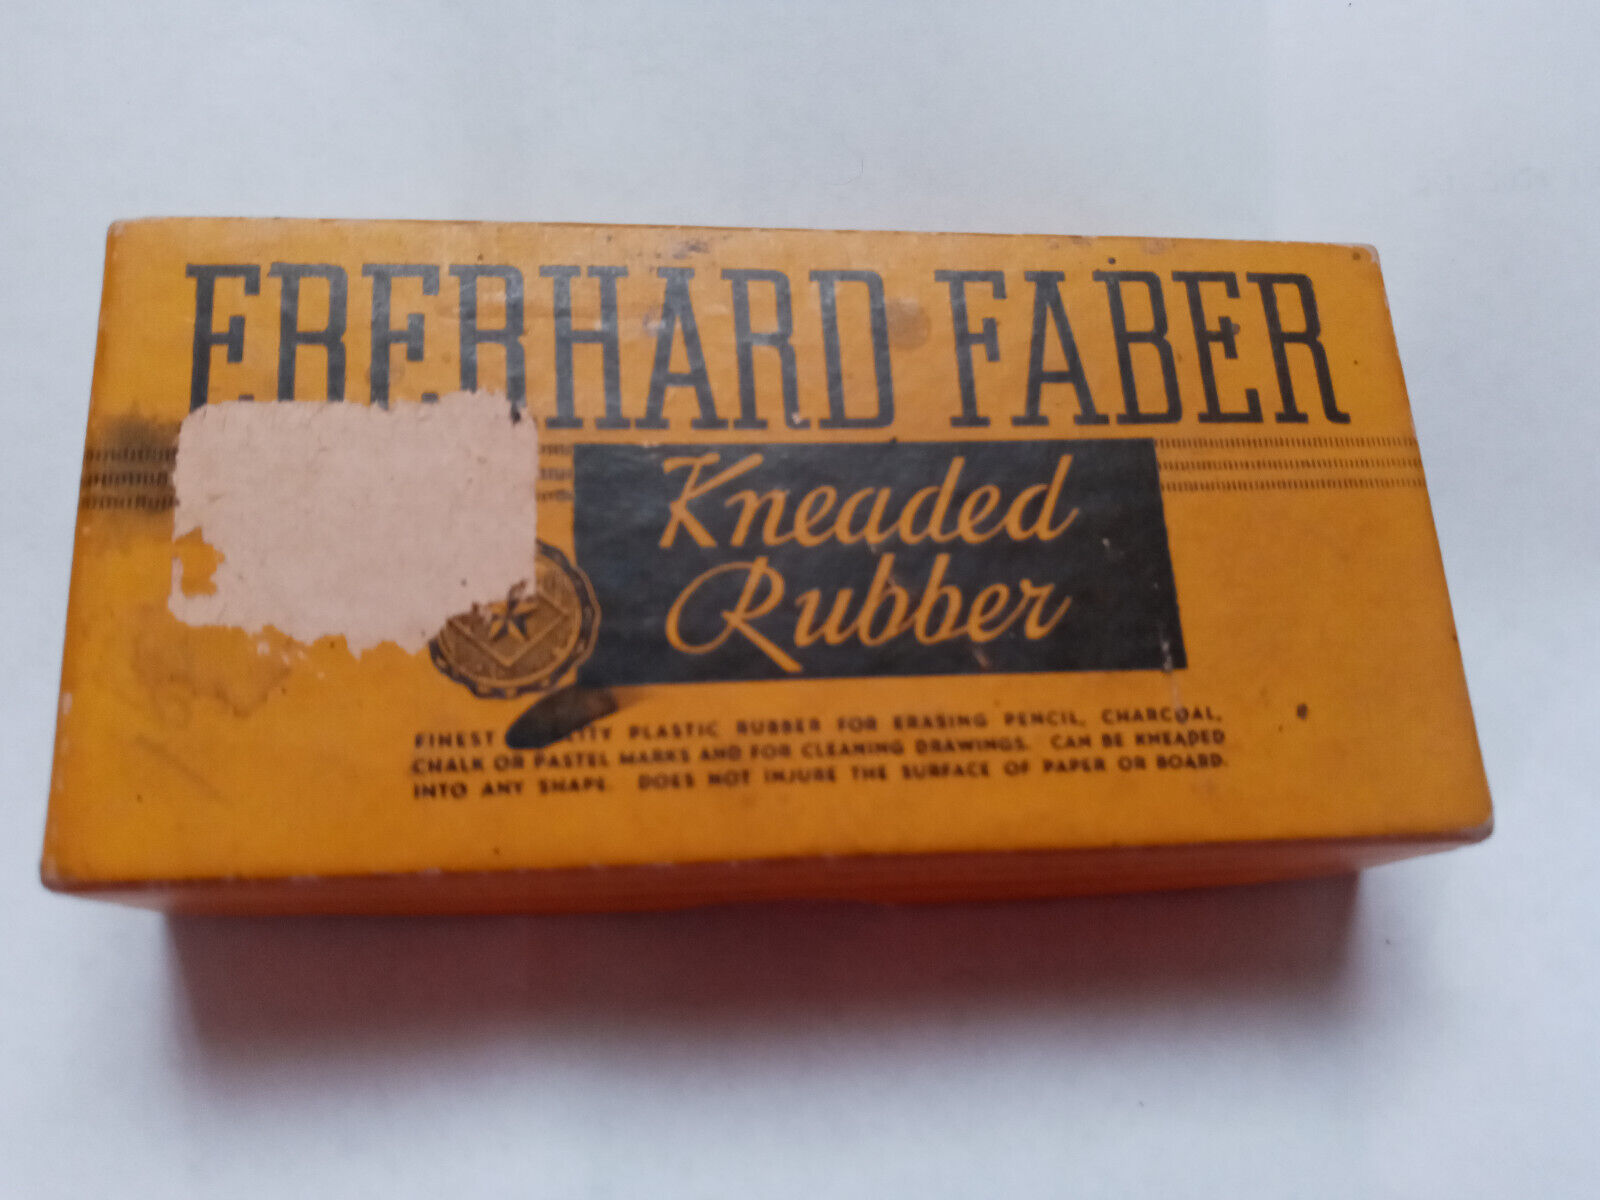 Vintage Eberhard Fader Kneaded Rubber  Fountain Pen Tips with Box. 12 tips